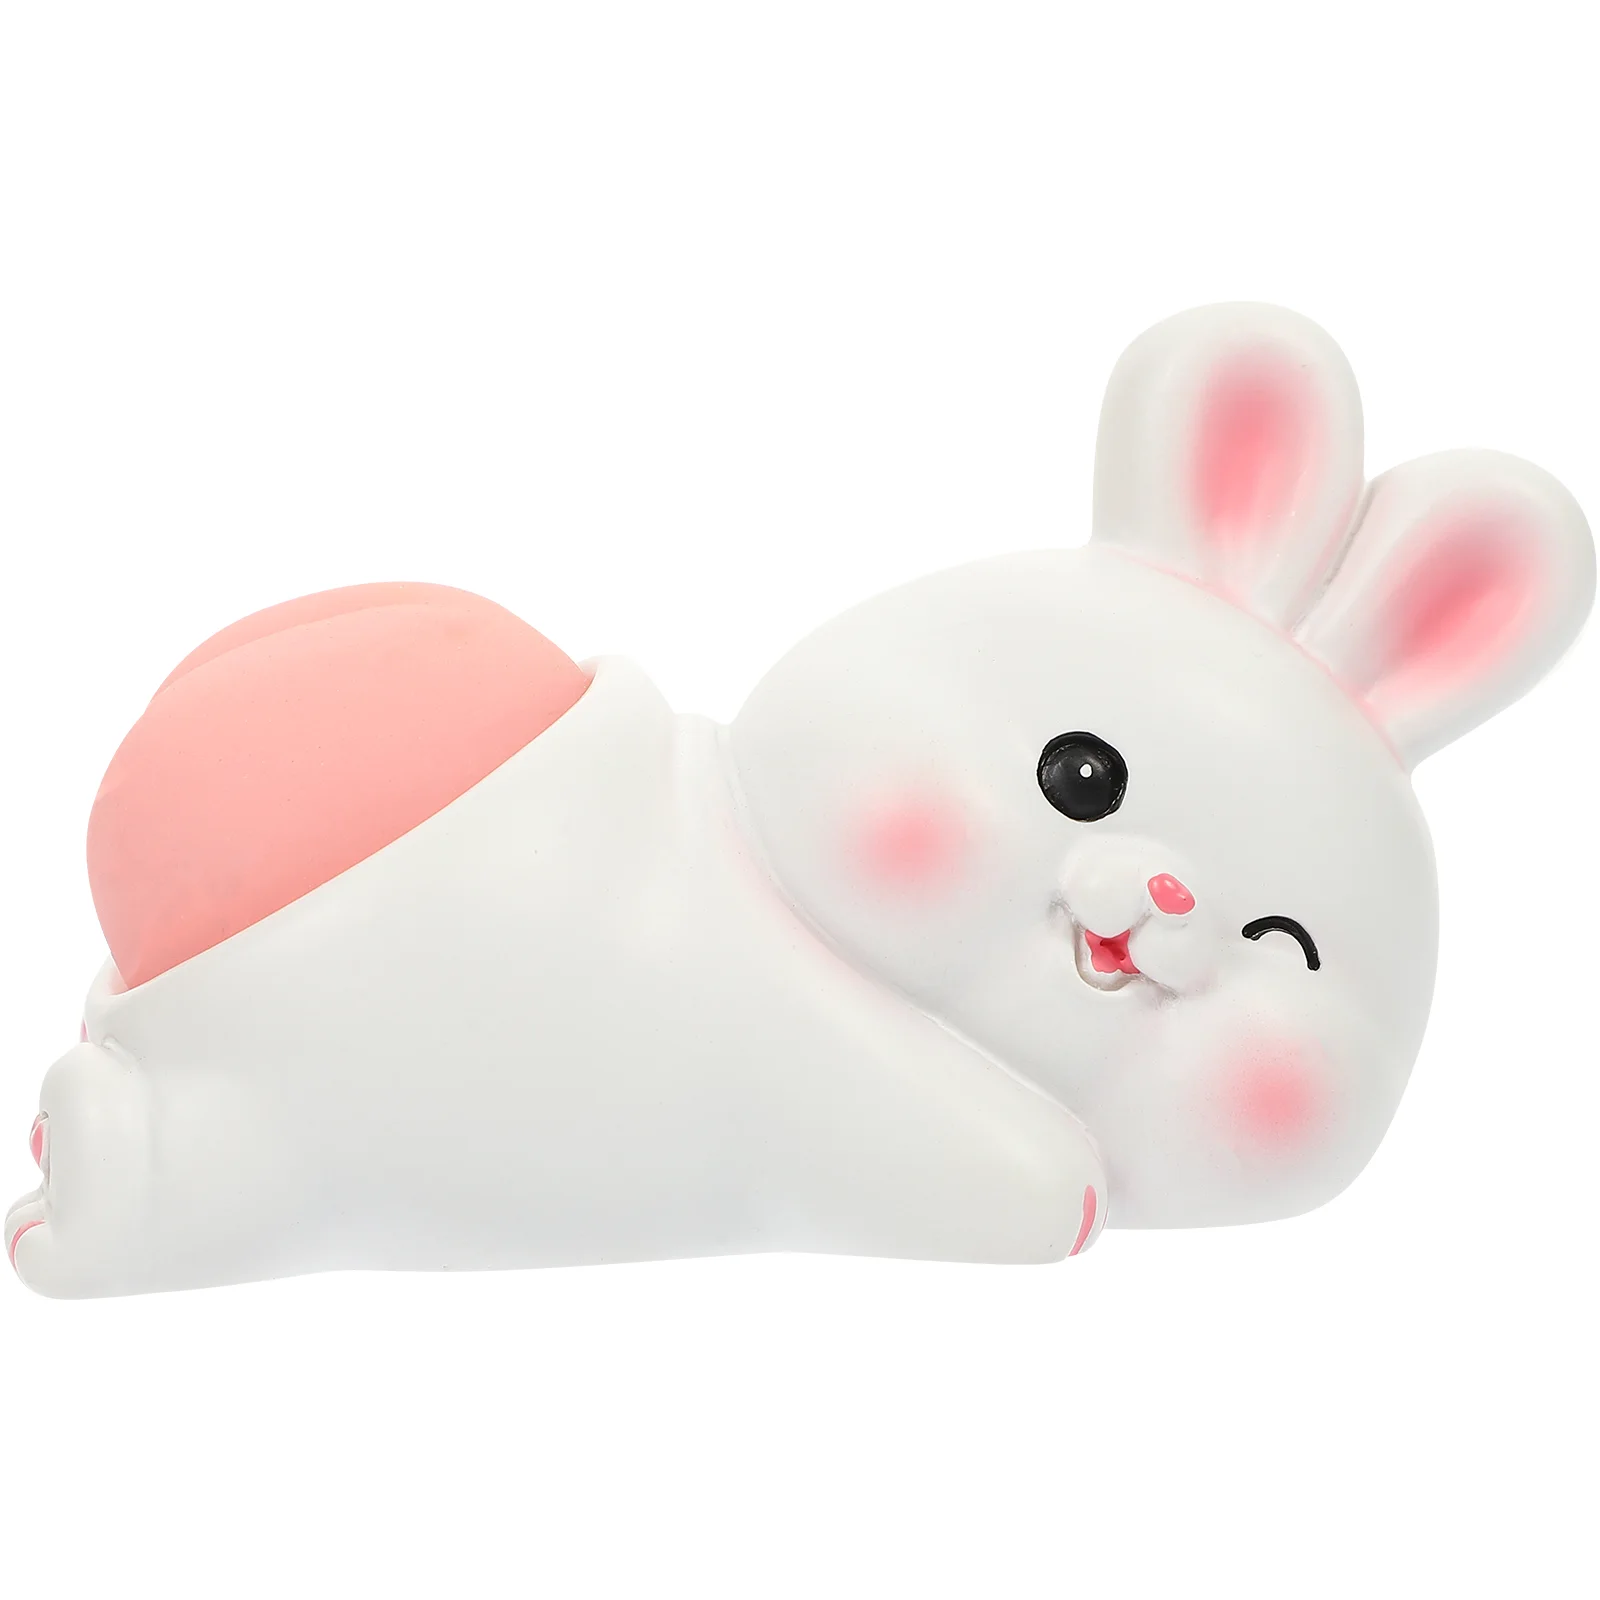 

Rabbit Year Figurinemini Animal Figurines Bunny Gift Chinese New Birthday Decor Squeeze Zodiac Hand Favor Party Stress